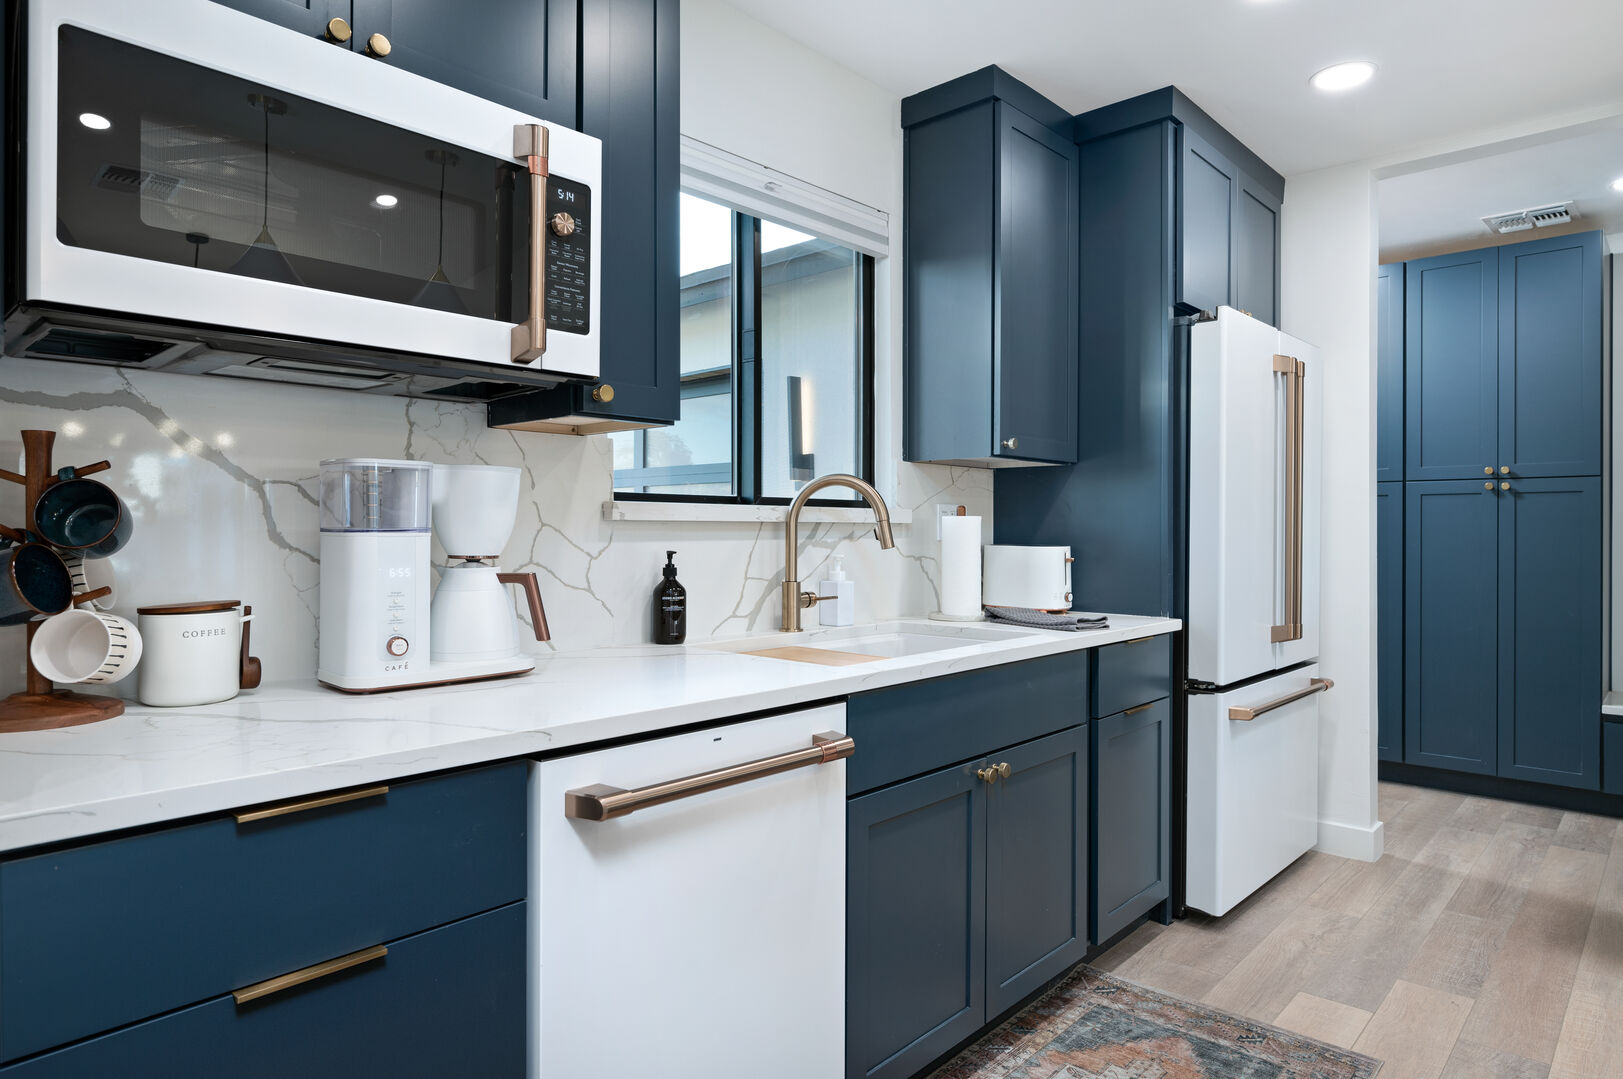 We love the matching appliances.